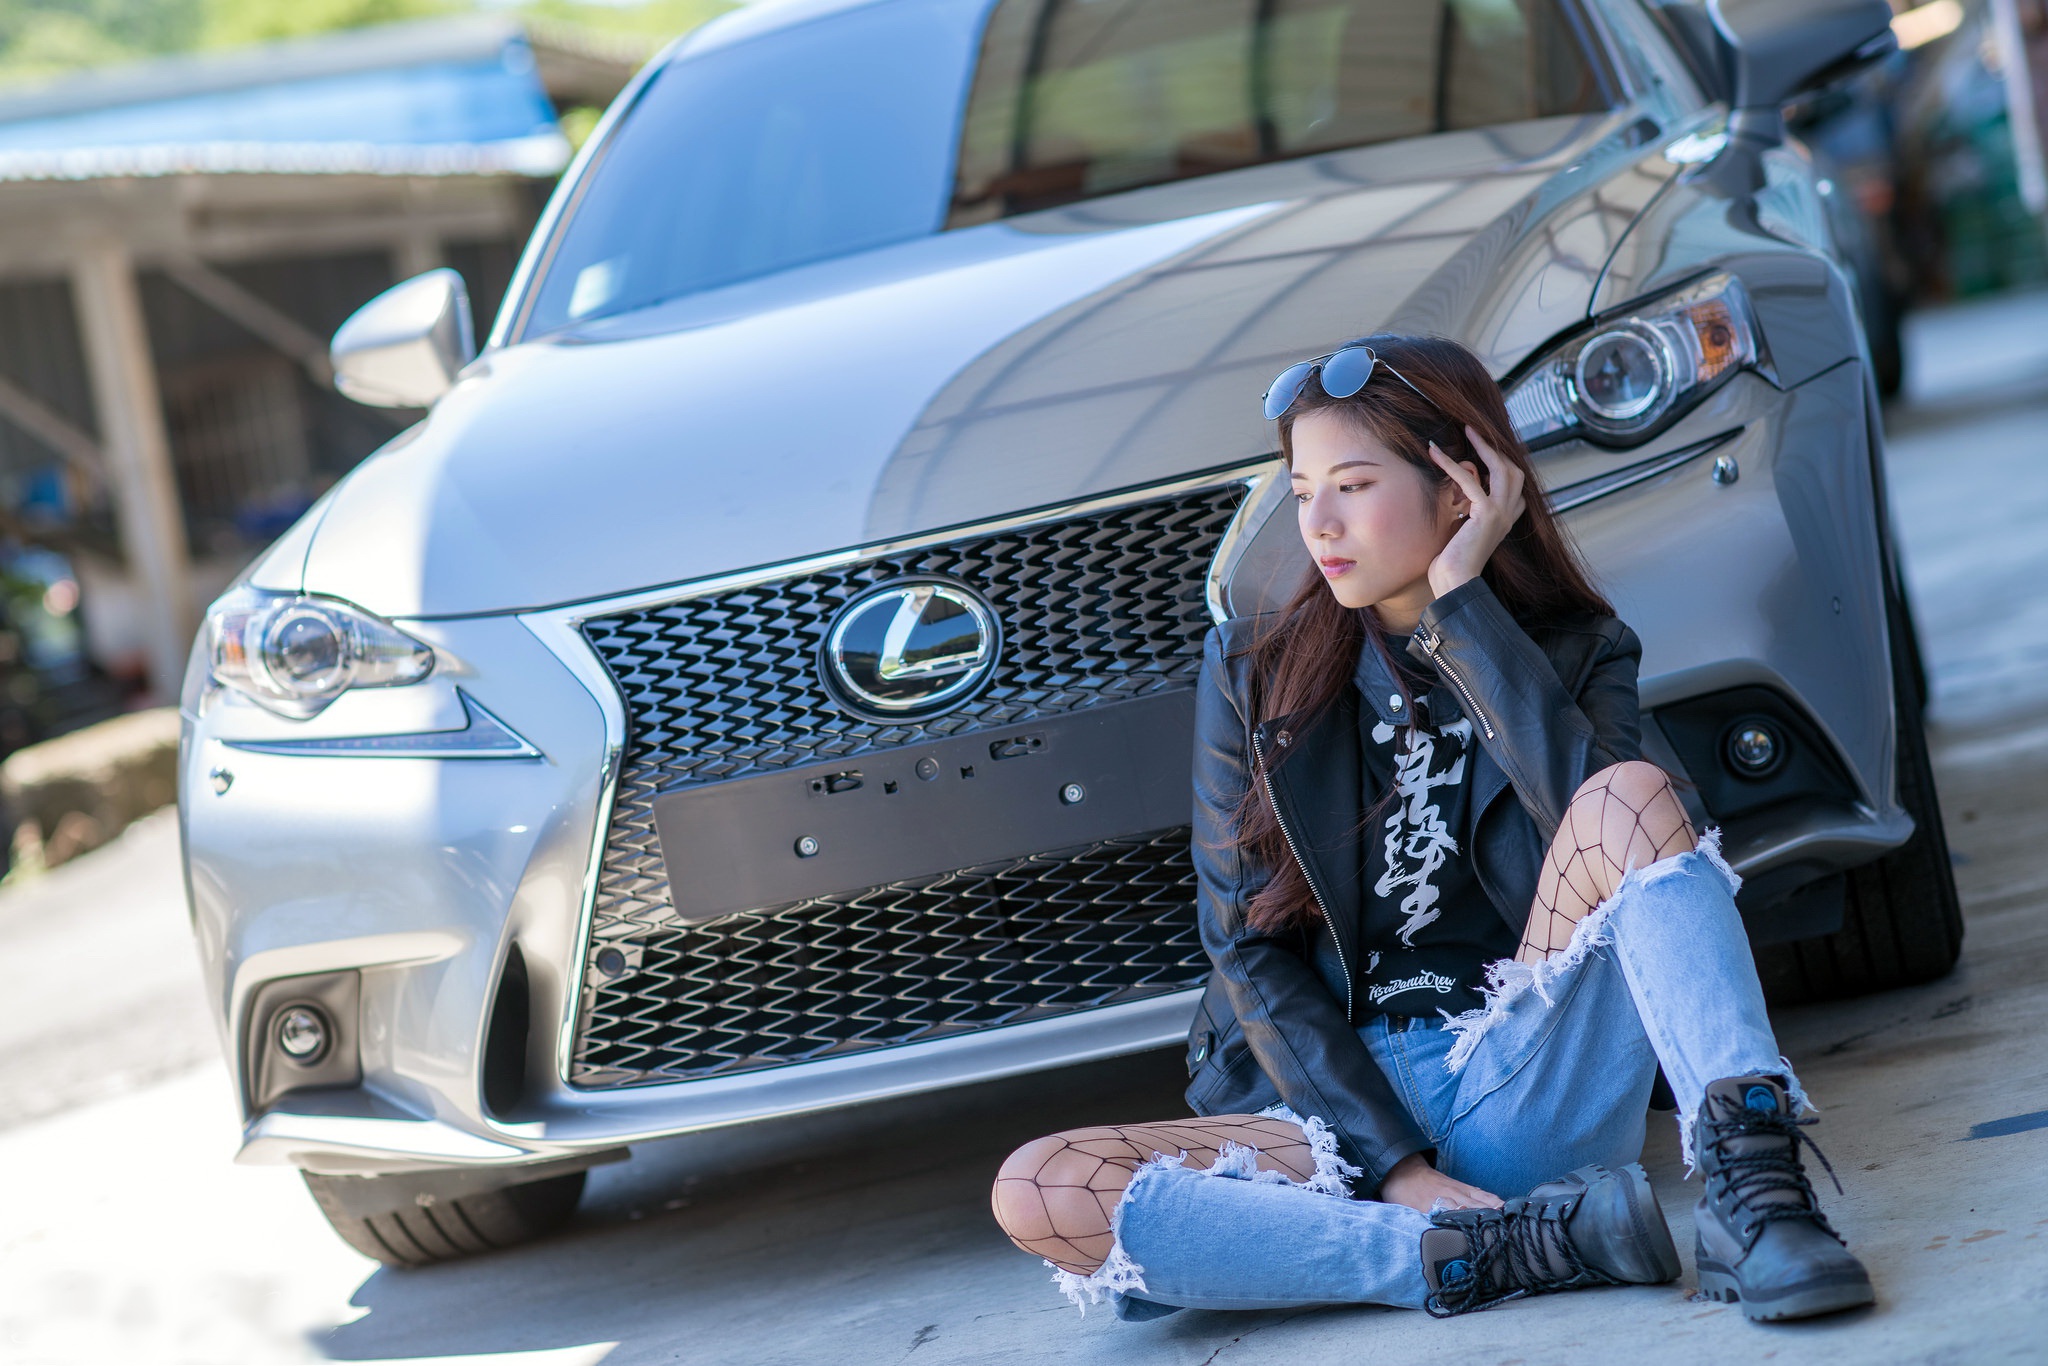 People 2048x1366 Asian women car Lexus women with cars Japanese cars women with shades